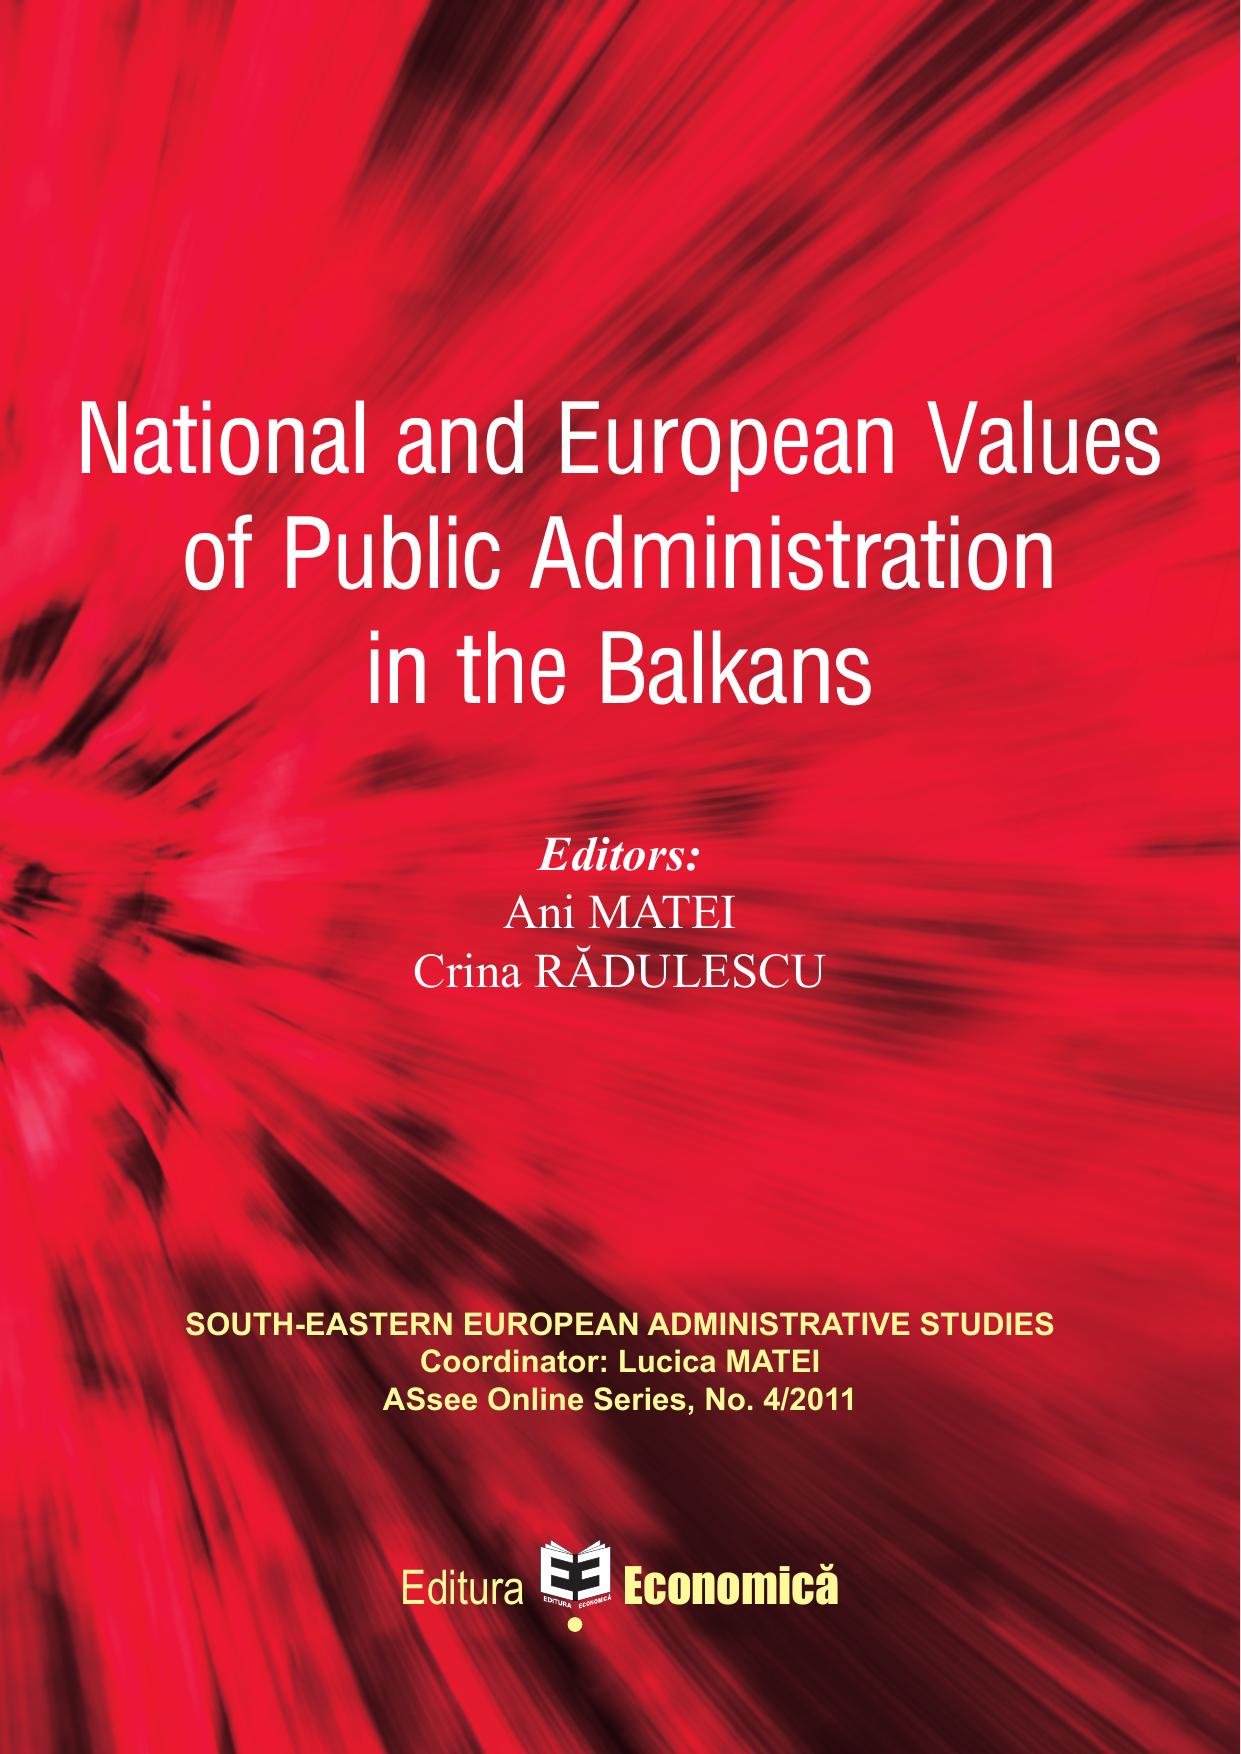 National and European Values of Public Administration in the Balkans